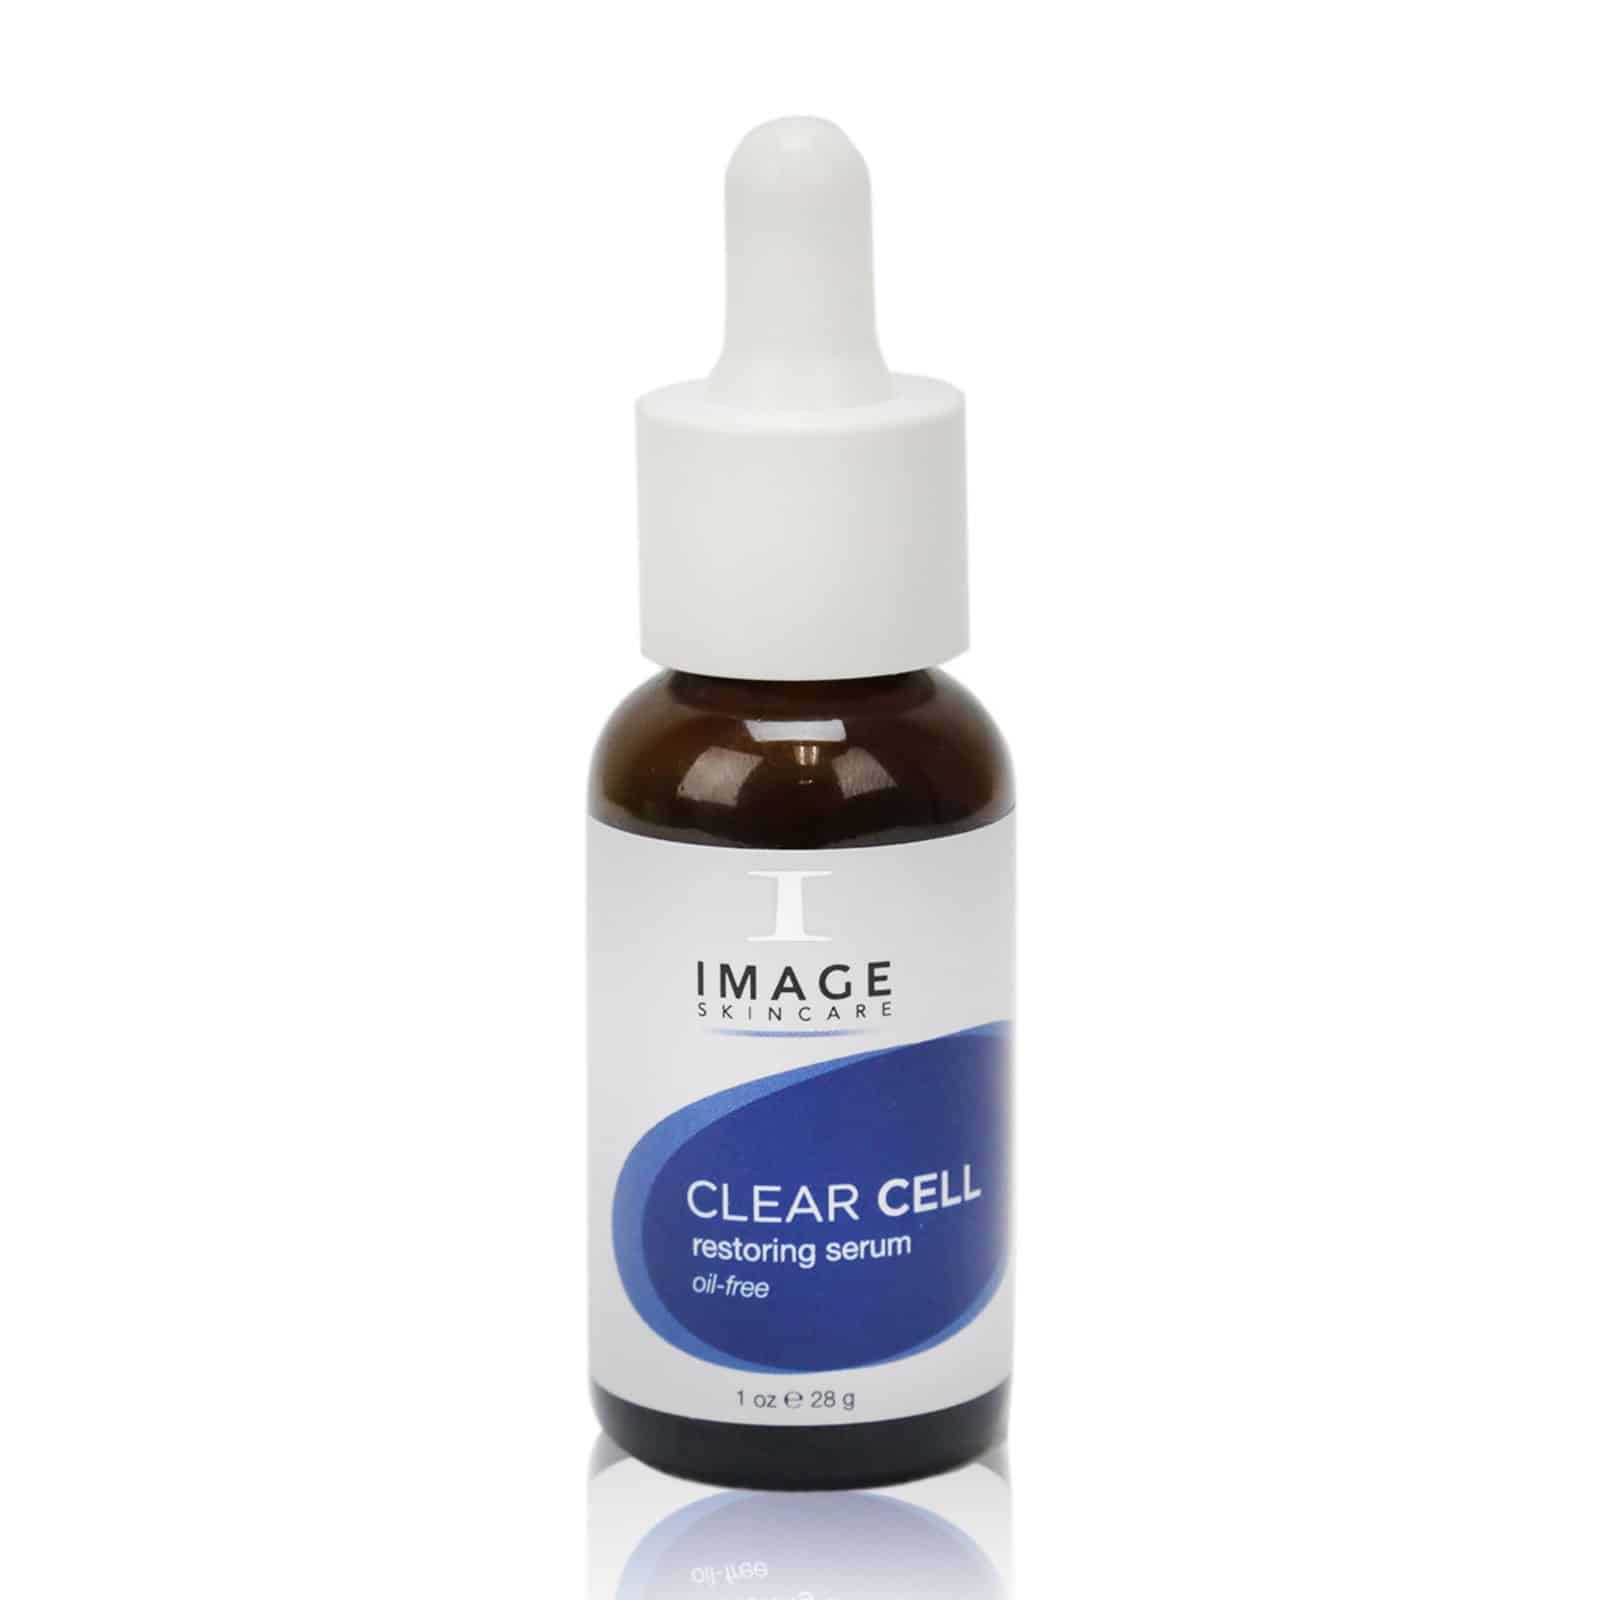 Serum clear. Image Skincare Clear Cell сыворотка. Image Skin Clear Cell лосьон. Сыворотка the Max Stem Cell Serum.